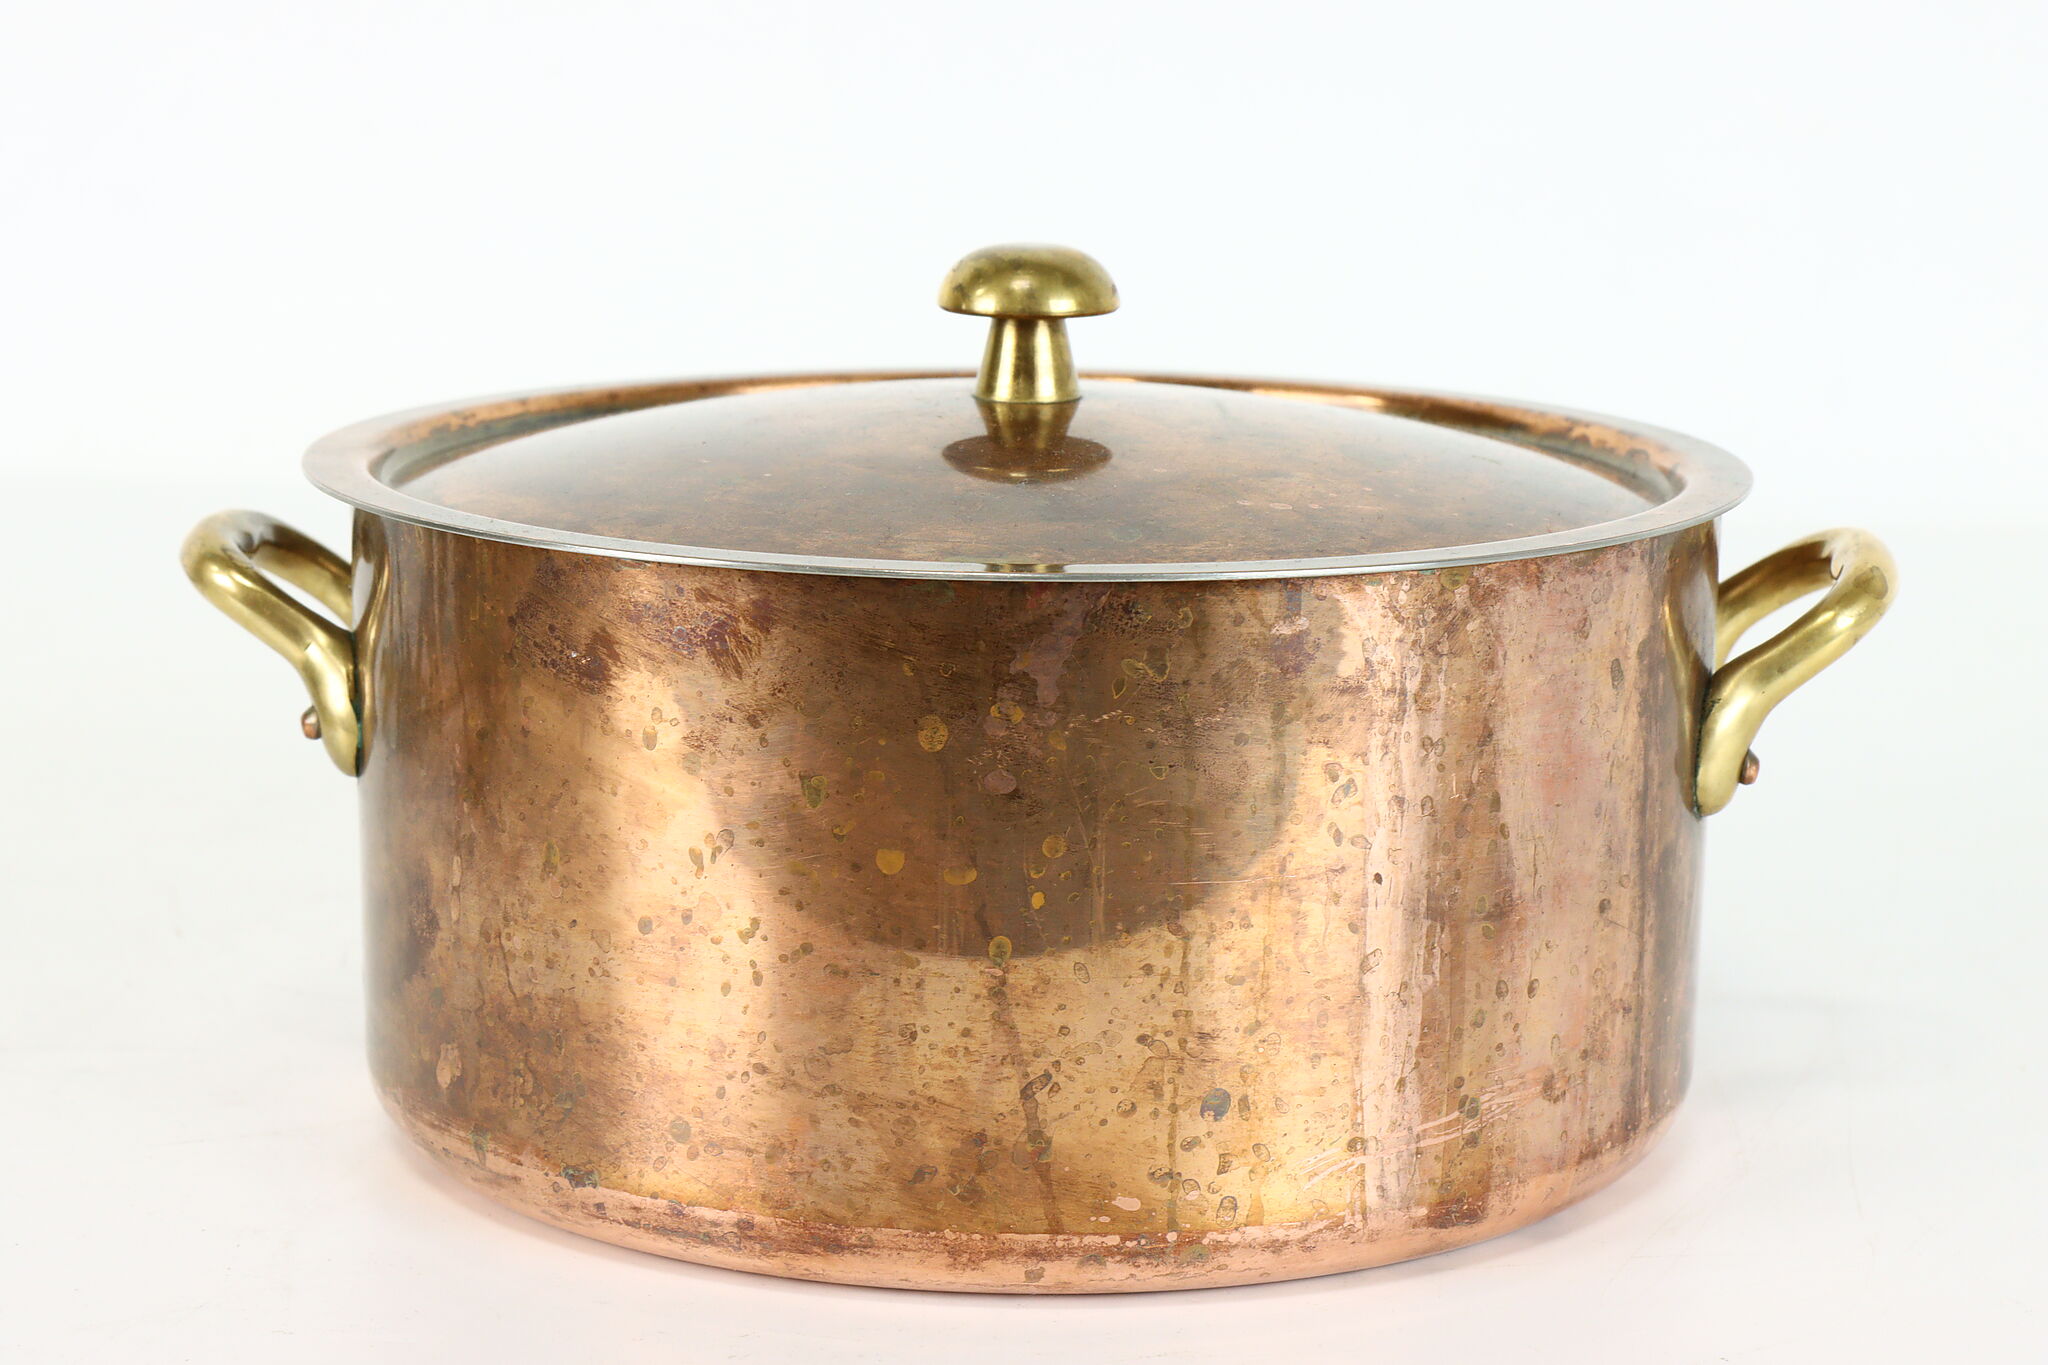 Farmhouse French Vintage Solid Copper Sauce Pan with Lid, Brass Handles  #38099